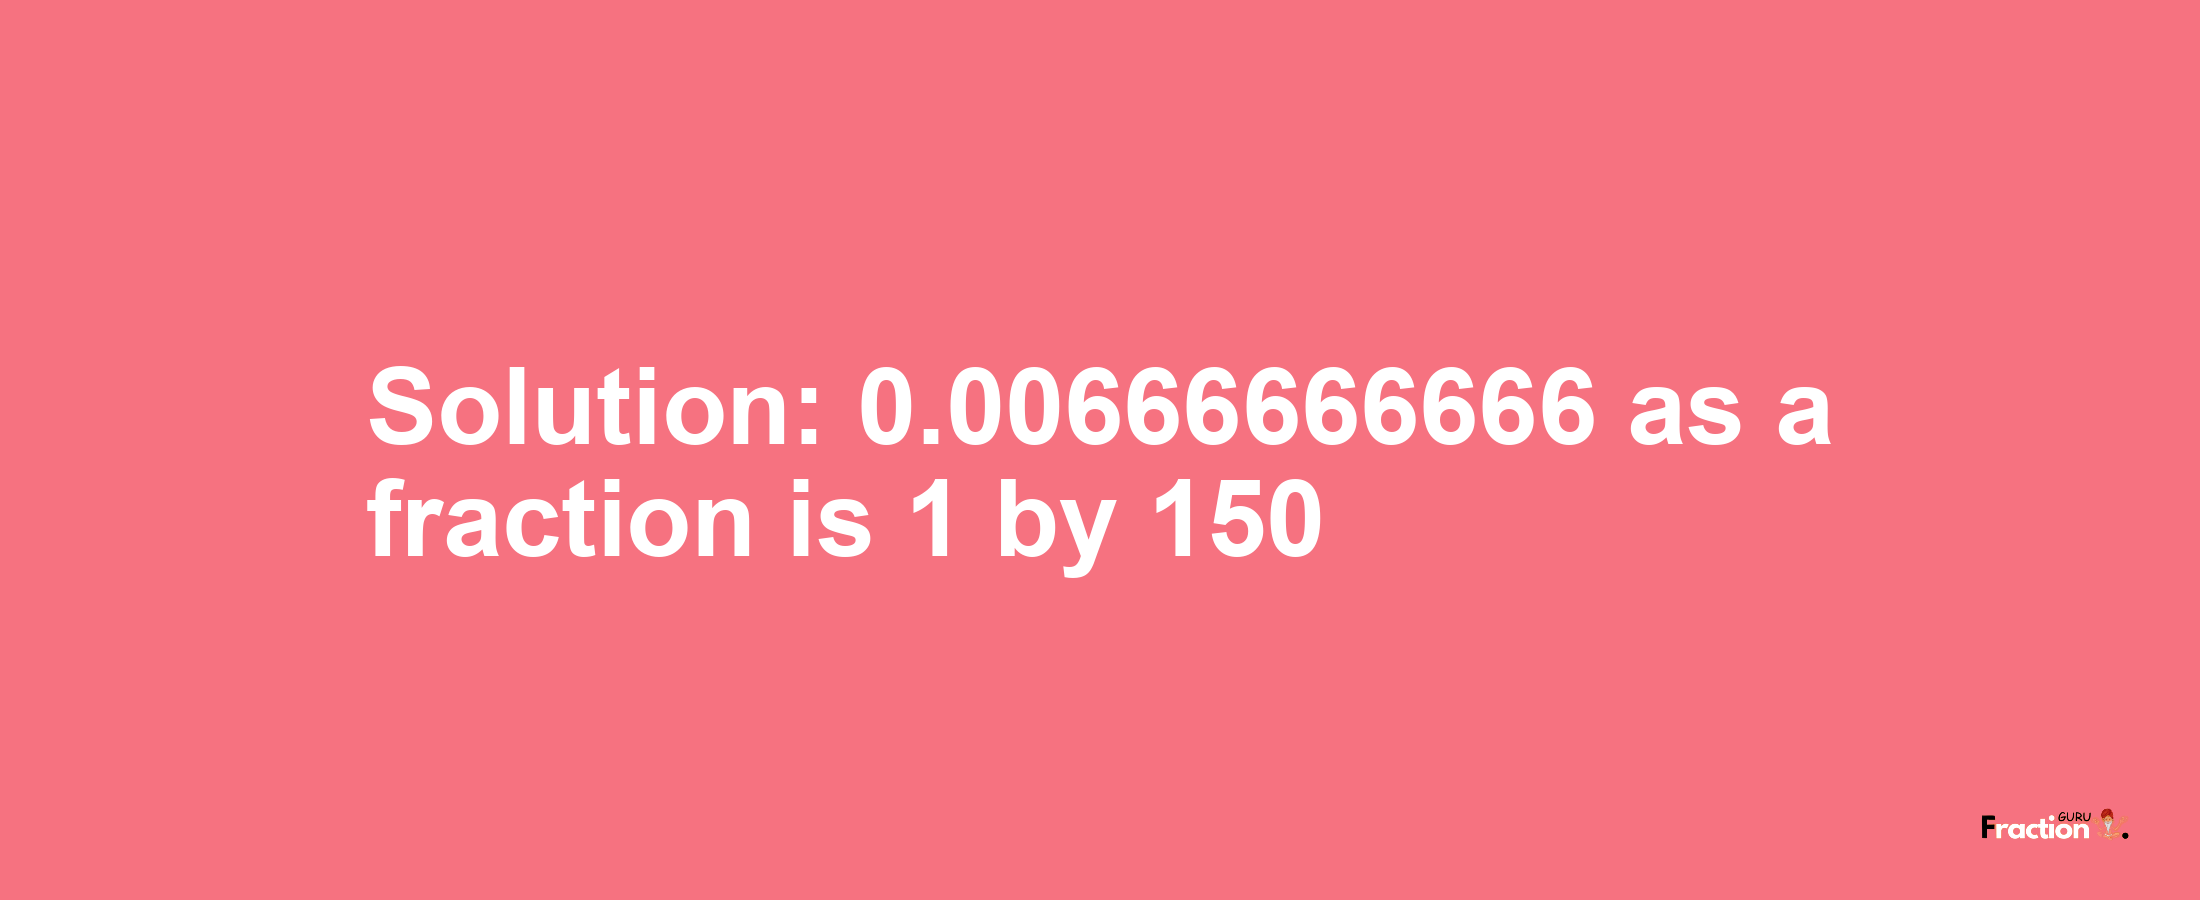 Solution:0.00666666666 as a fraction is 1/150